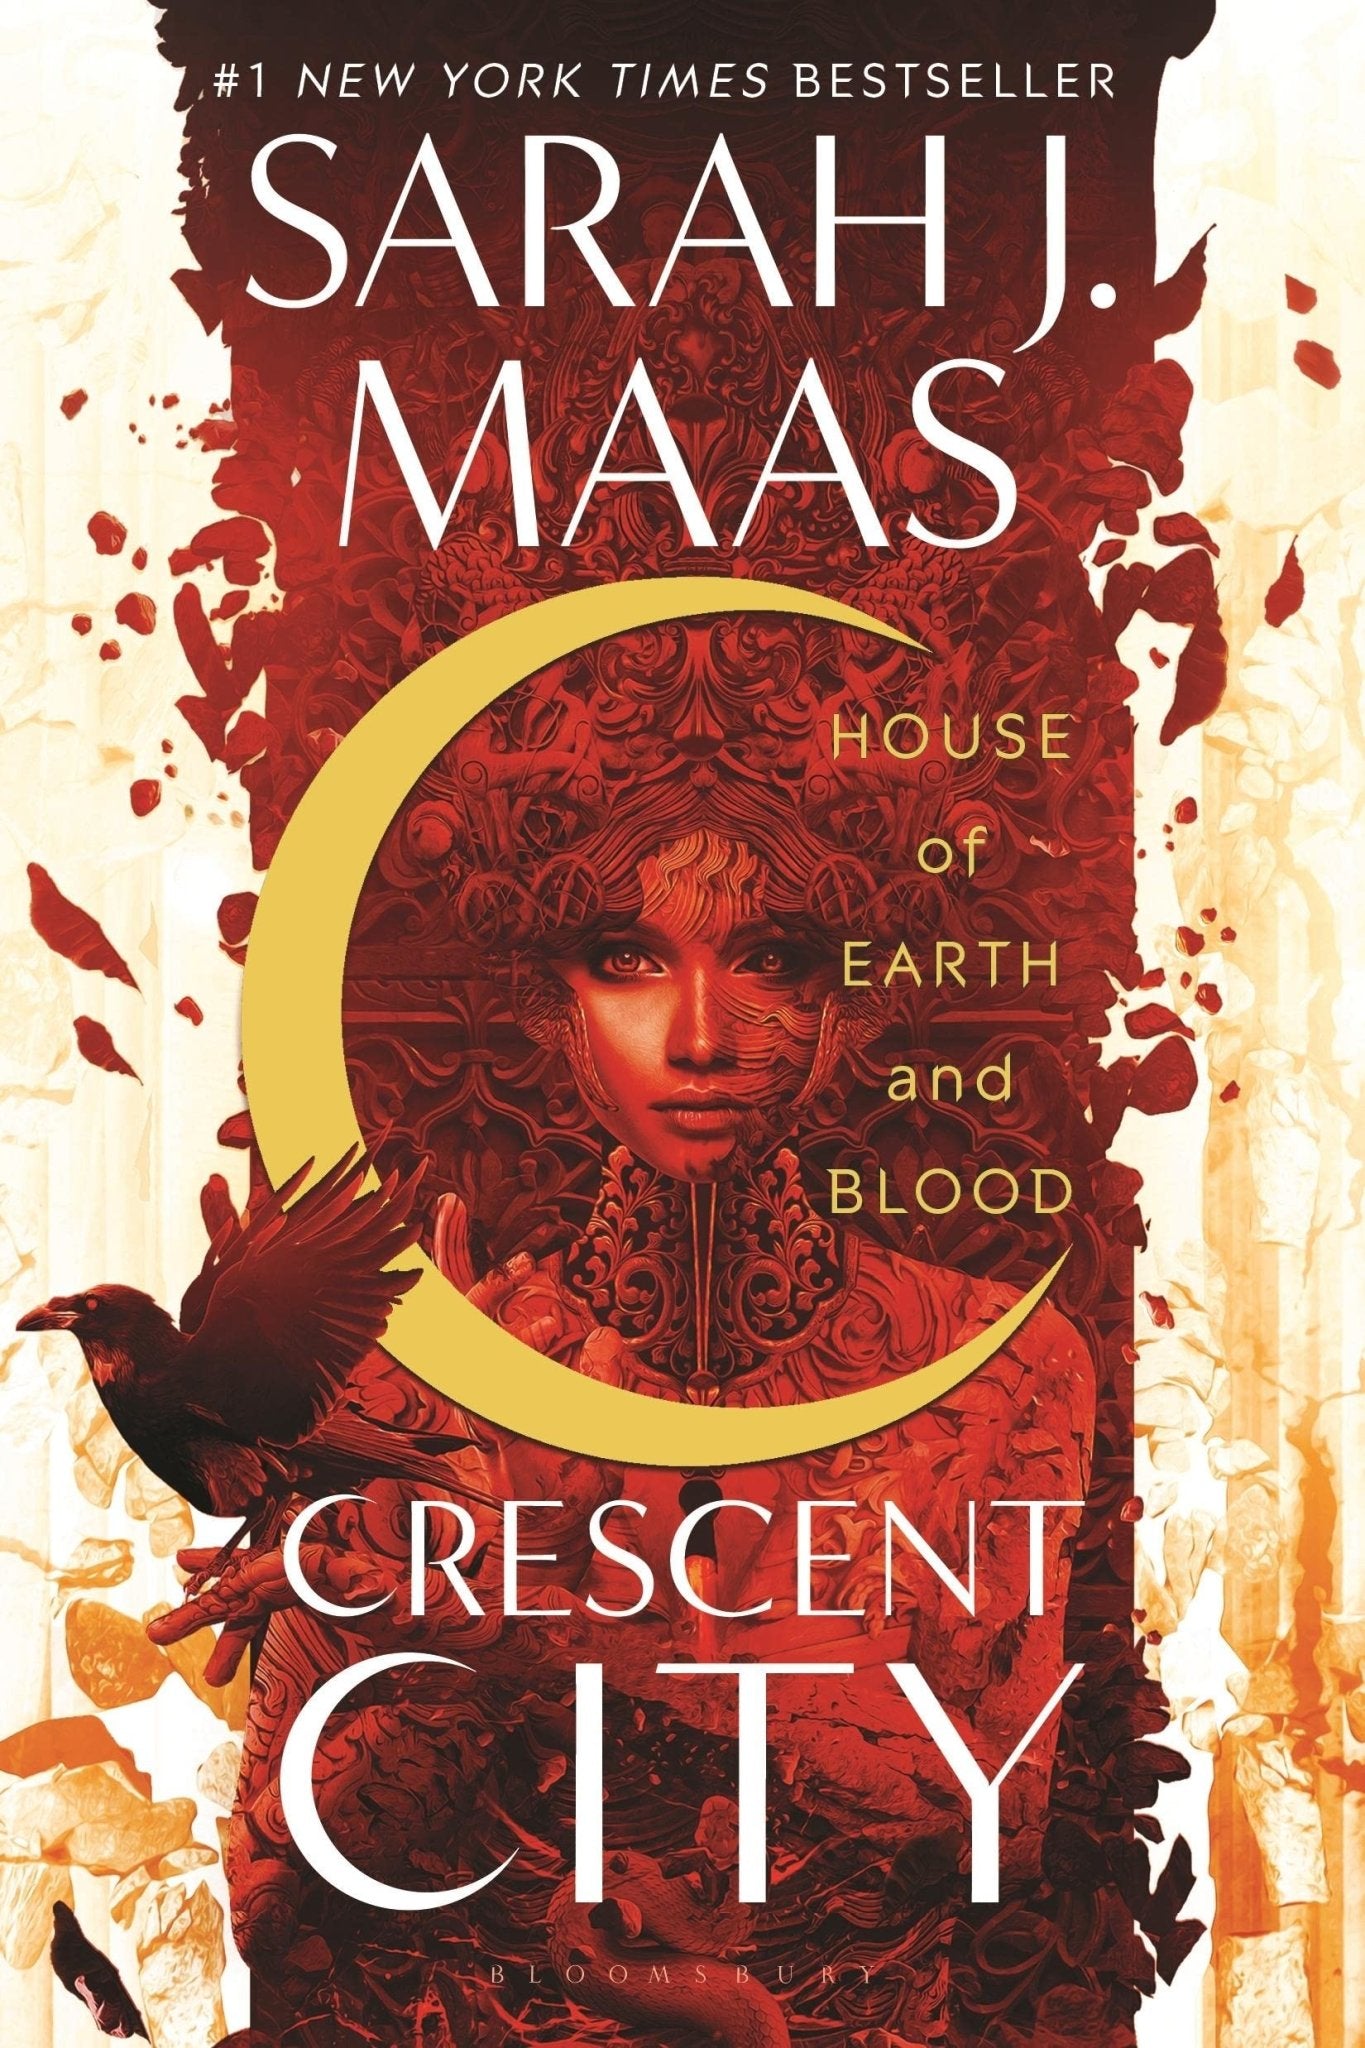 House of Earth and Blood (Crescent City #1) by Sarah J. Maas [Paperback] - LV'S Global Media